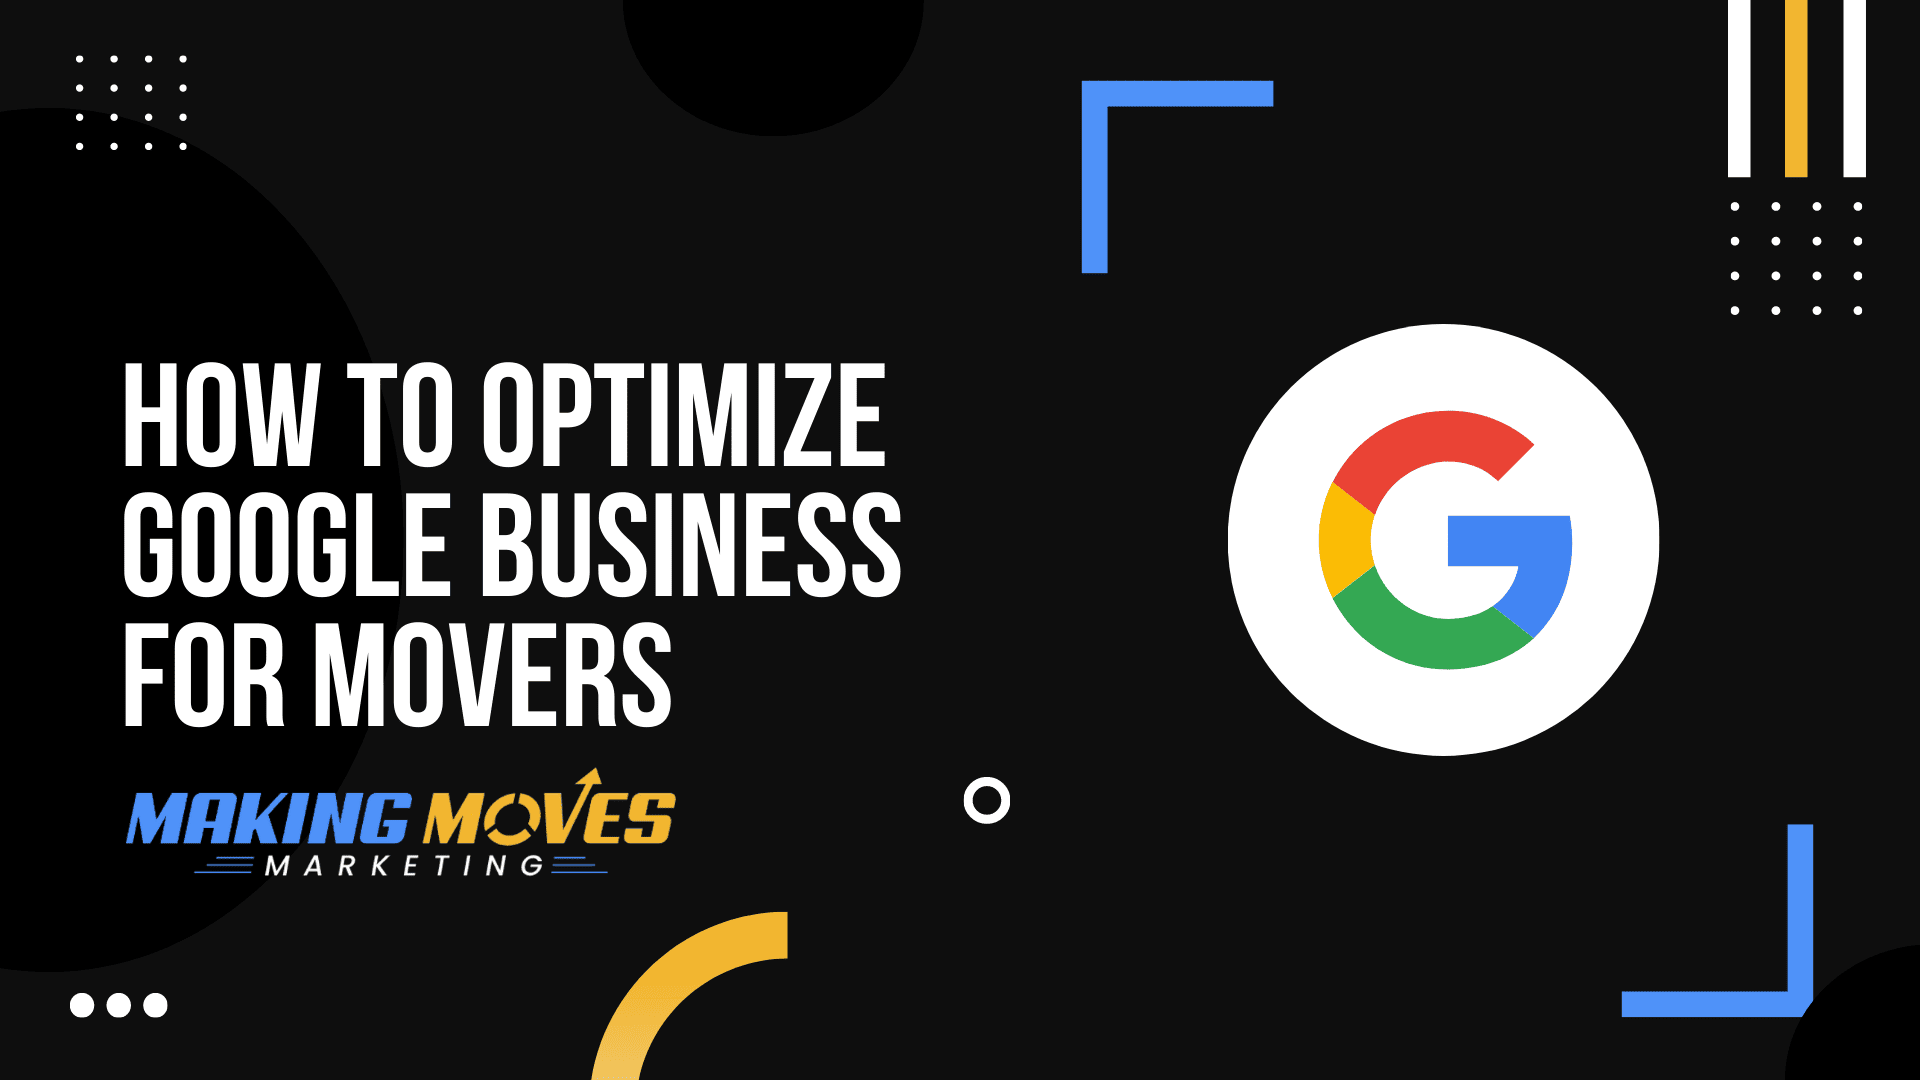 How to Optimize Google Business for Movers